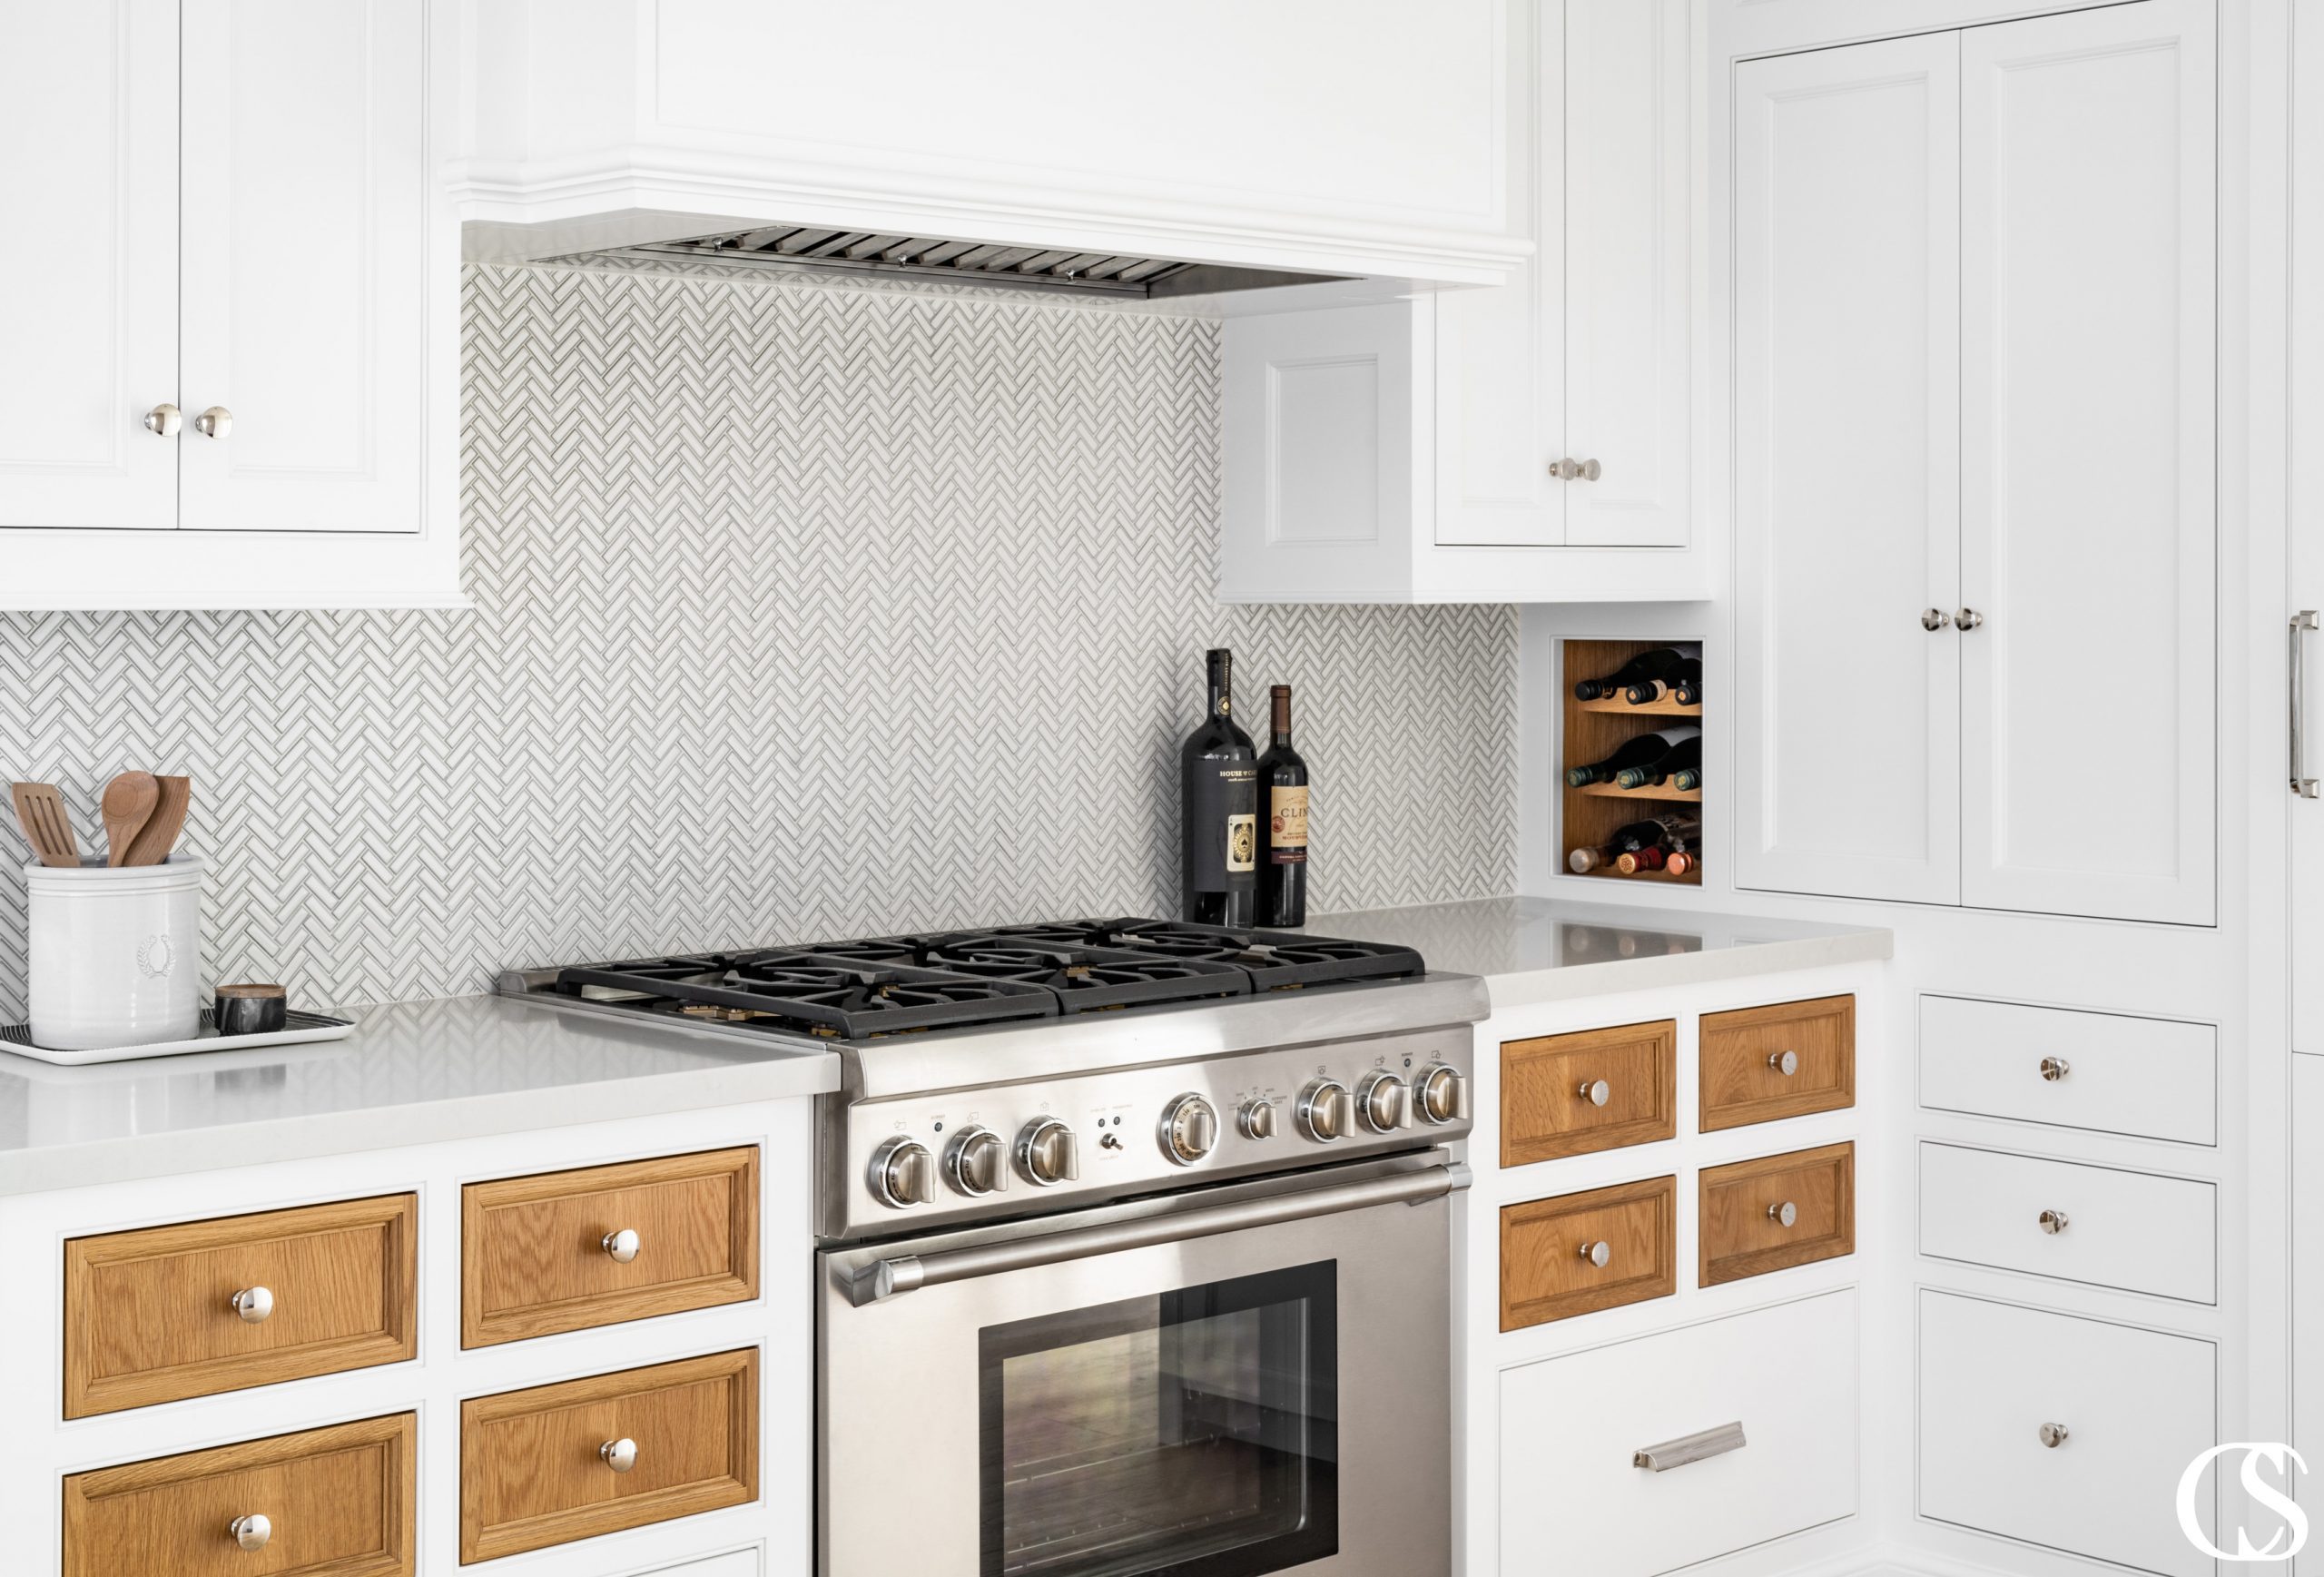 Who says every drawer and cupboard door have to match? This custom kitchen cabinet design features contrasting stained wood against the rest of the white painted cabinets, to great effect!